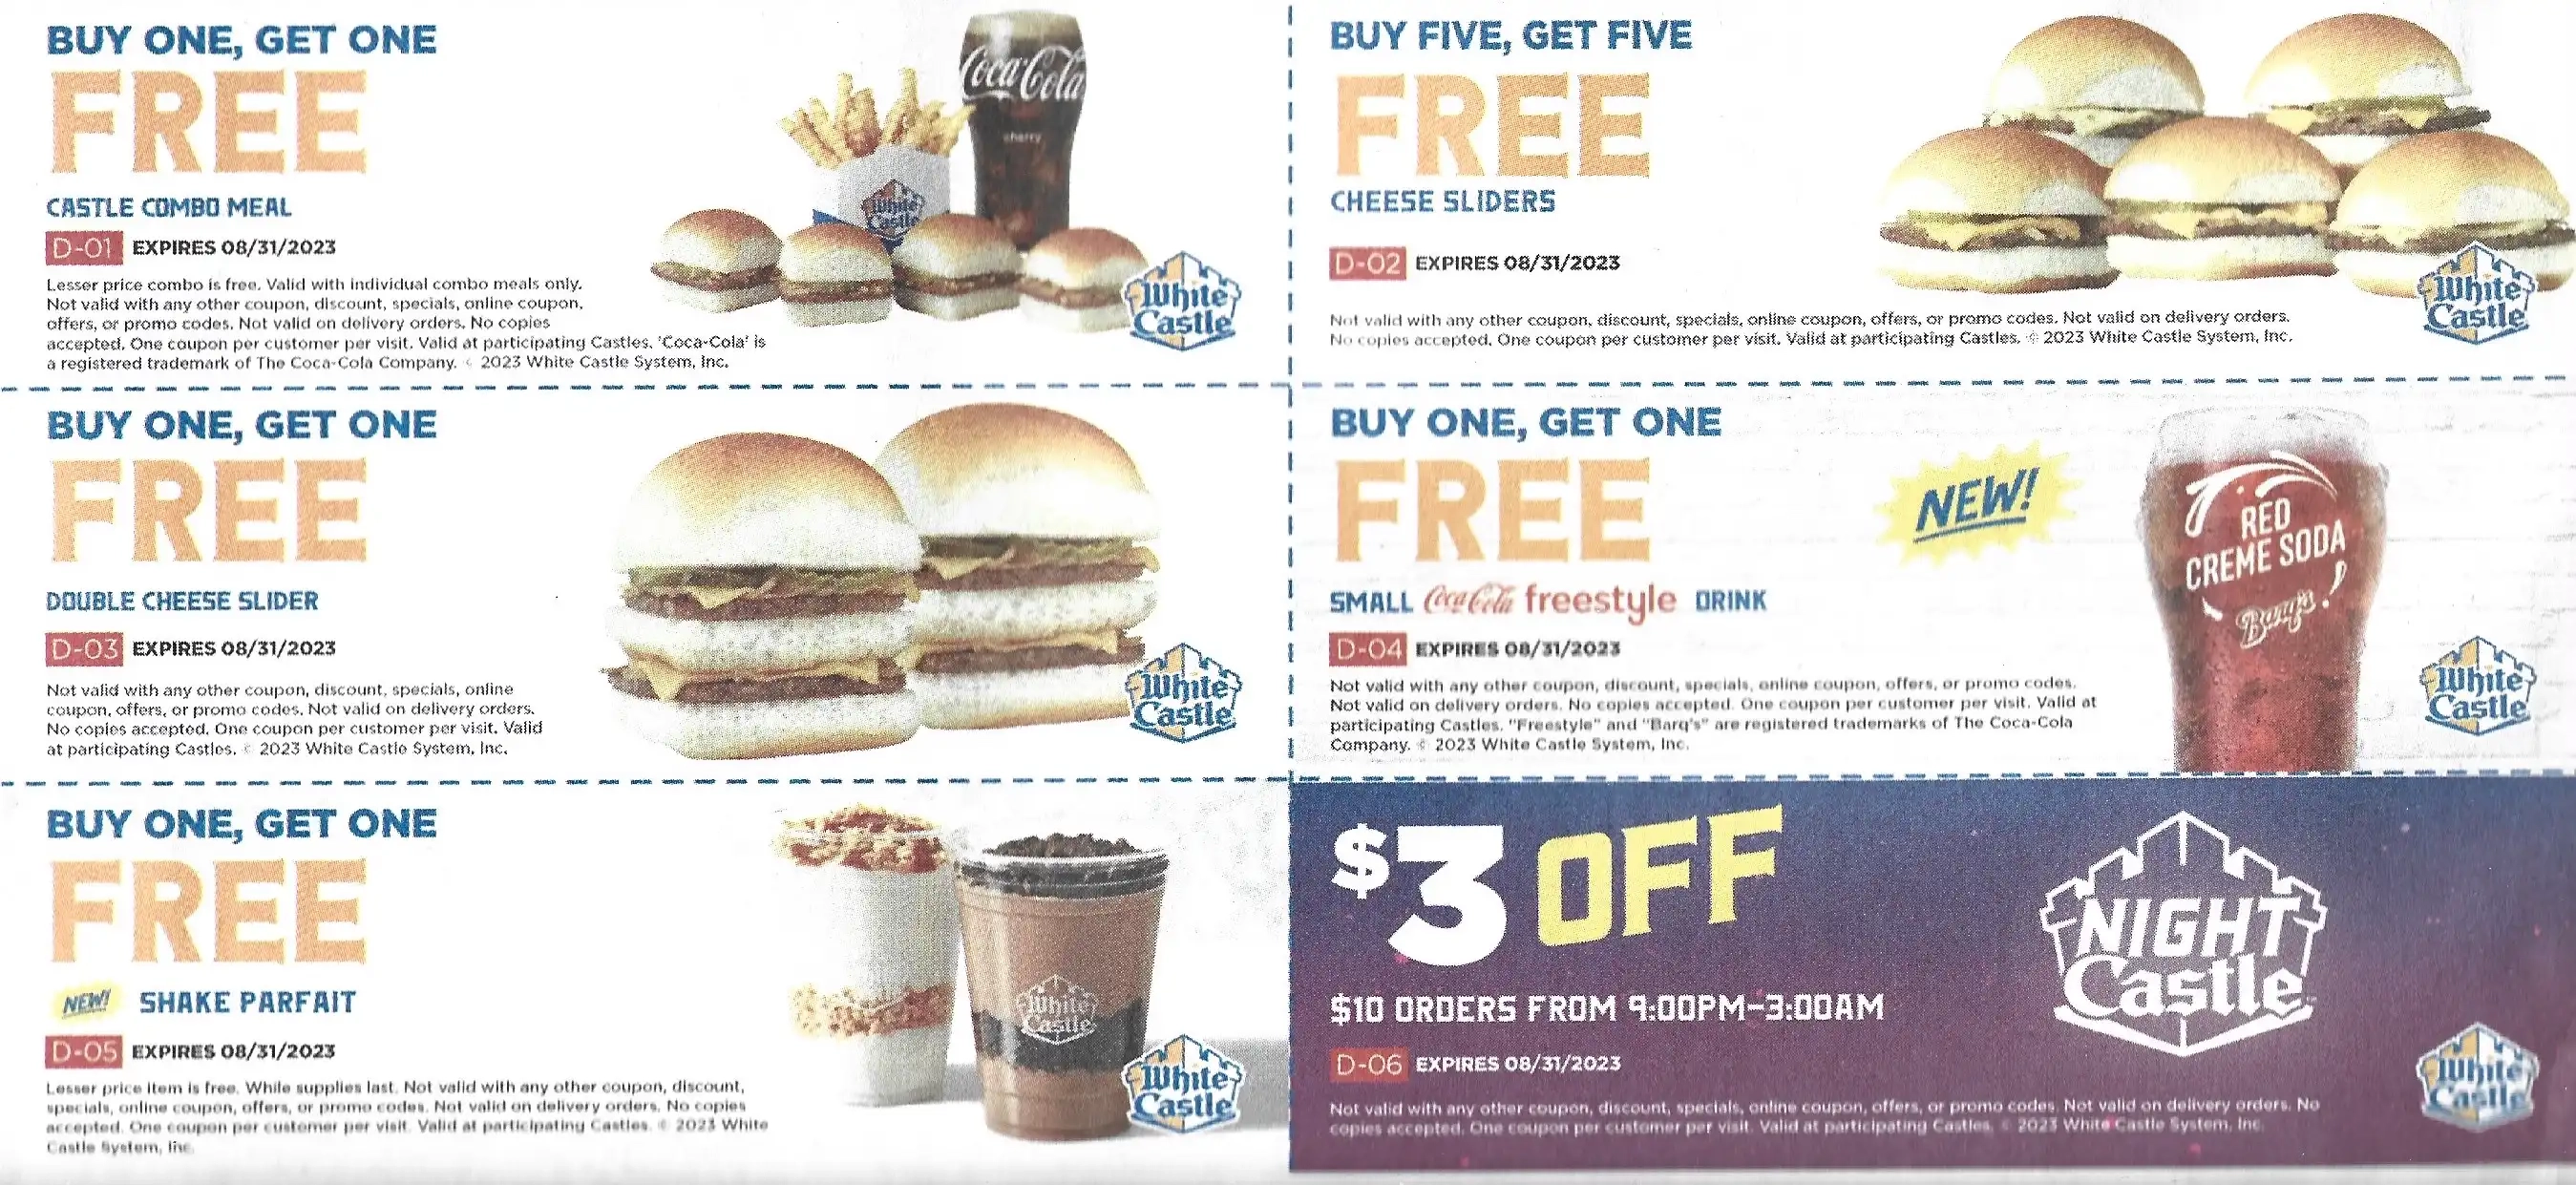 B2ap3 Large White Castle Printable Store Coupons Buy One Get One Free Expires 08 31 2023 2.webp